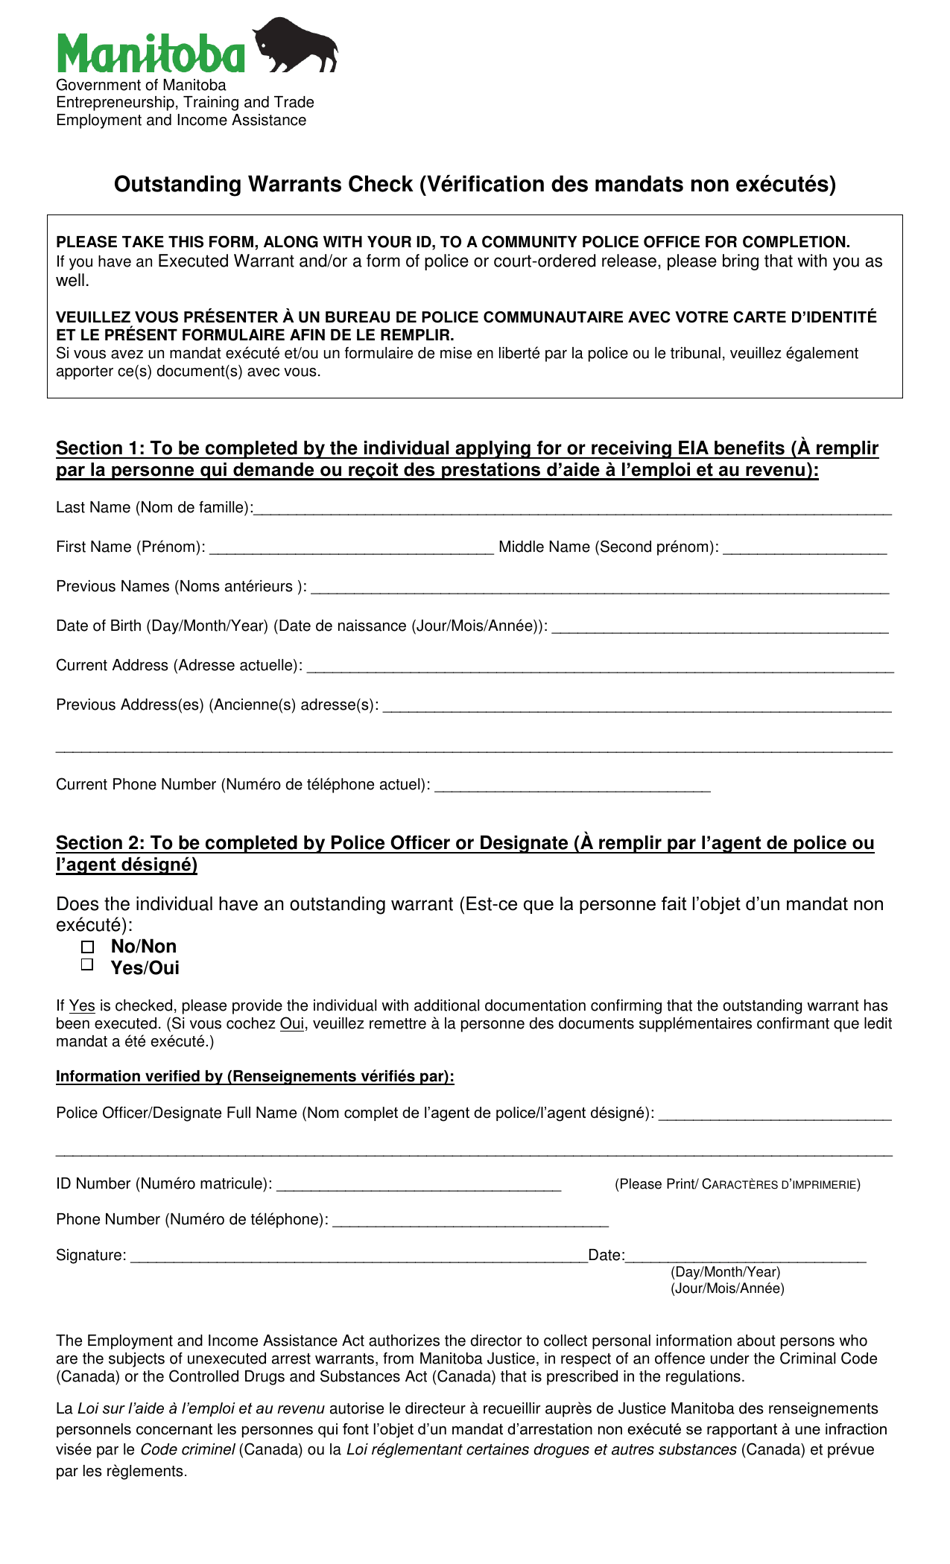 Outstanding Warrants Check - Manitoba, Canada (English / French), Page 1